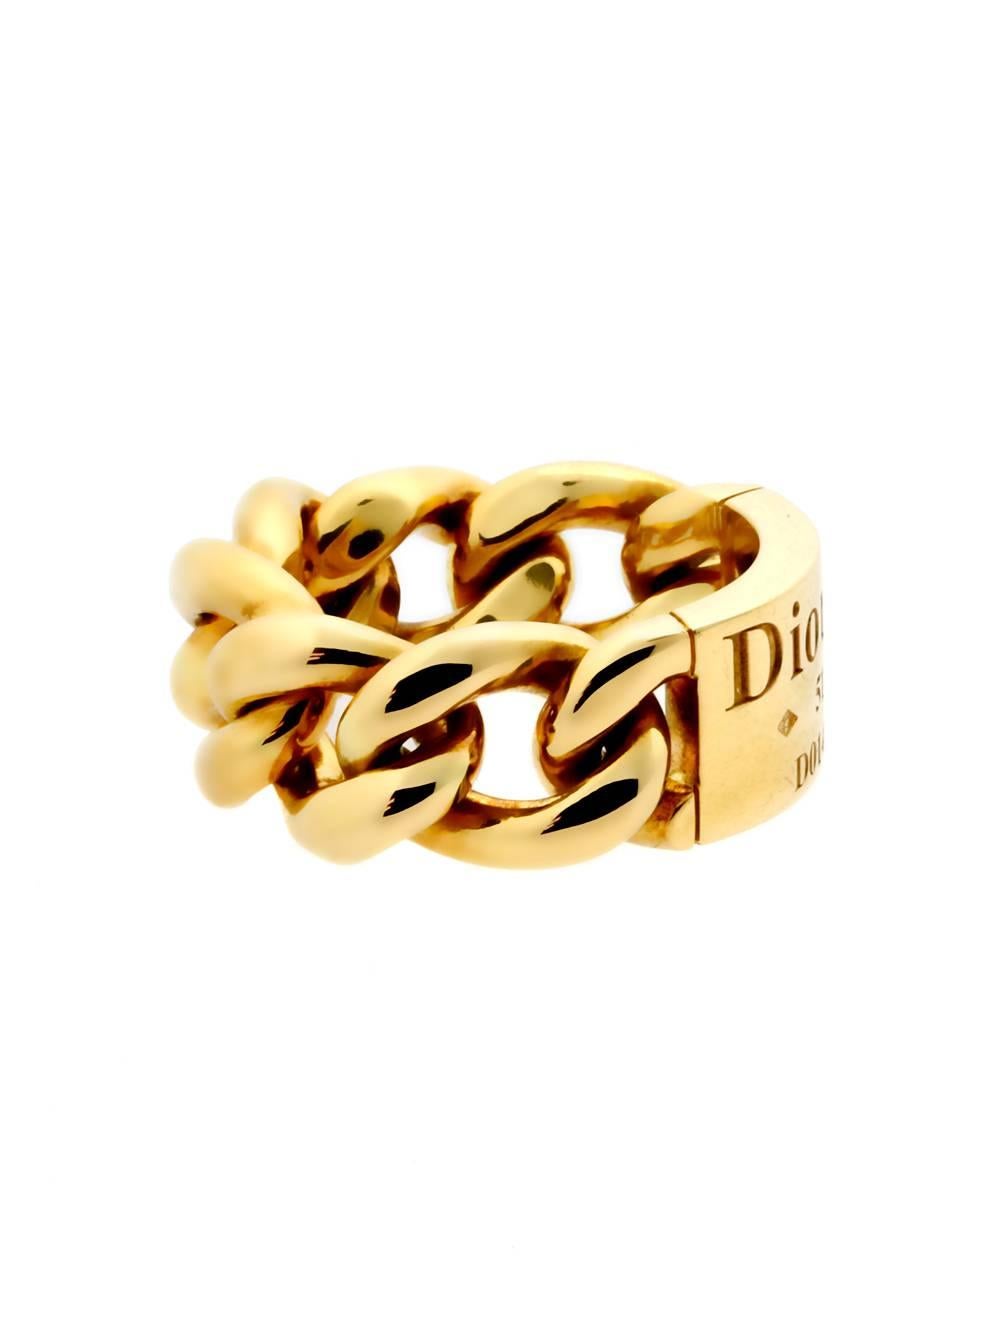 Christian Dior 18k yellow gold “Gourmette” featuring an engraved plaque encircled by a fabulous chunky gold chain-link band. 

Weight: 13.8 Grams
Size: EU 51 / US 5 1/2

Inventory ID: 0000290